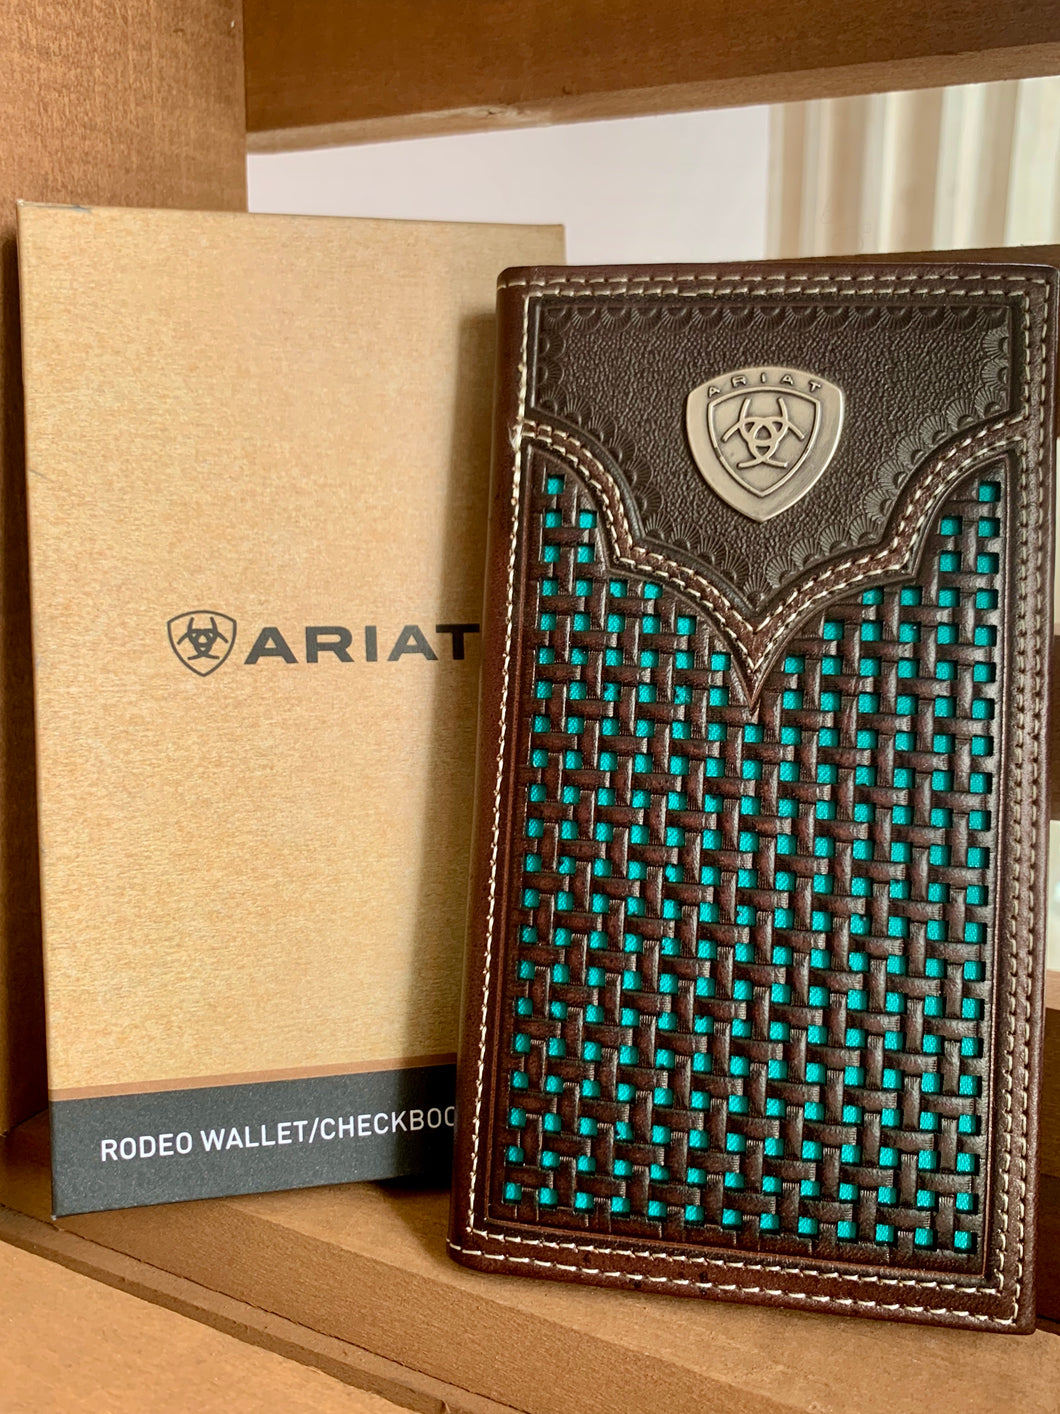 Ariat Rodeo Wallet/Checkbook cover - Ariat shield concho with weave design (turquoise)